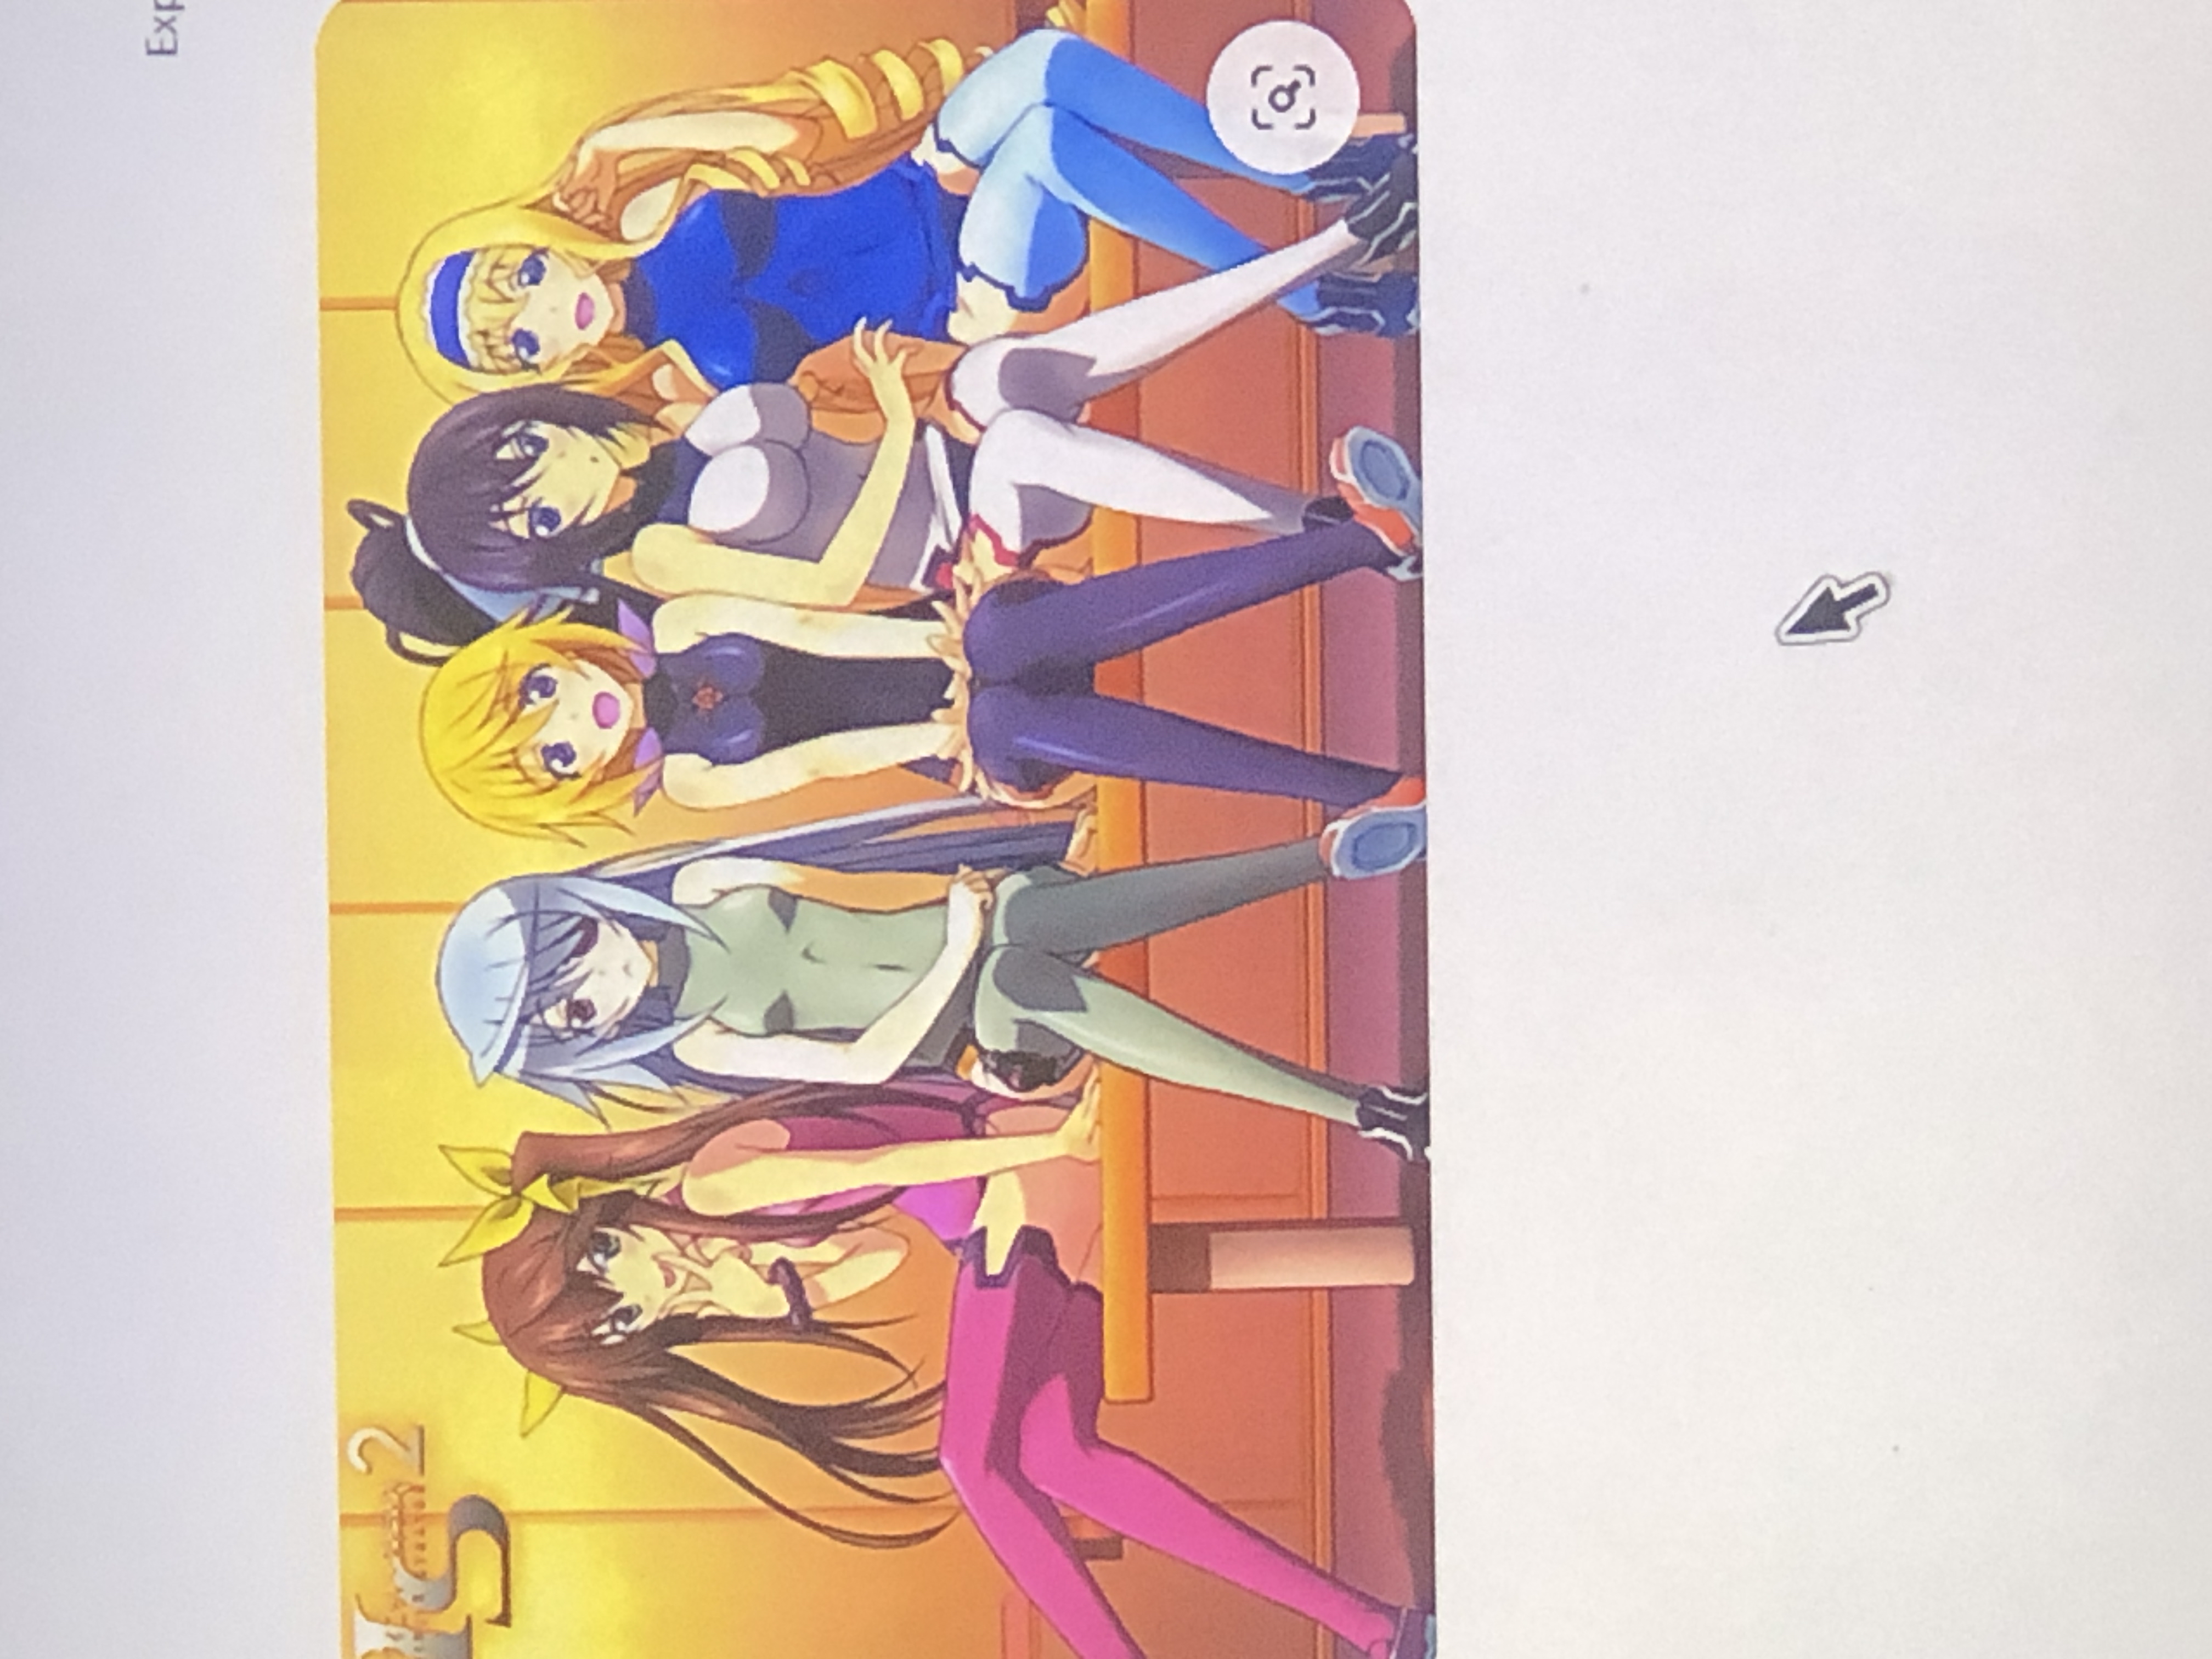 infinite stratos Do whaever you want with World reorganization Book